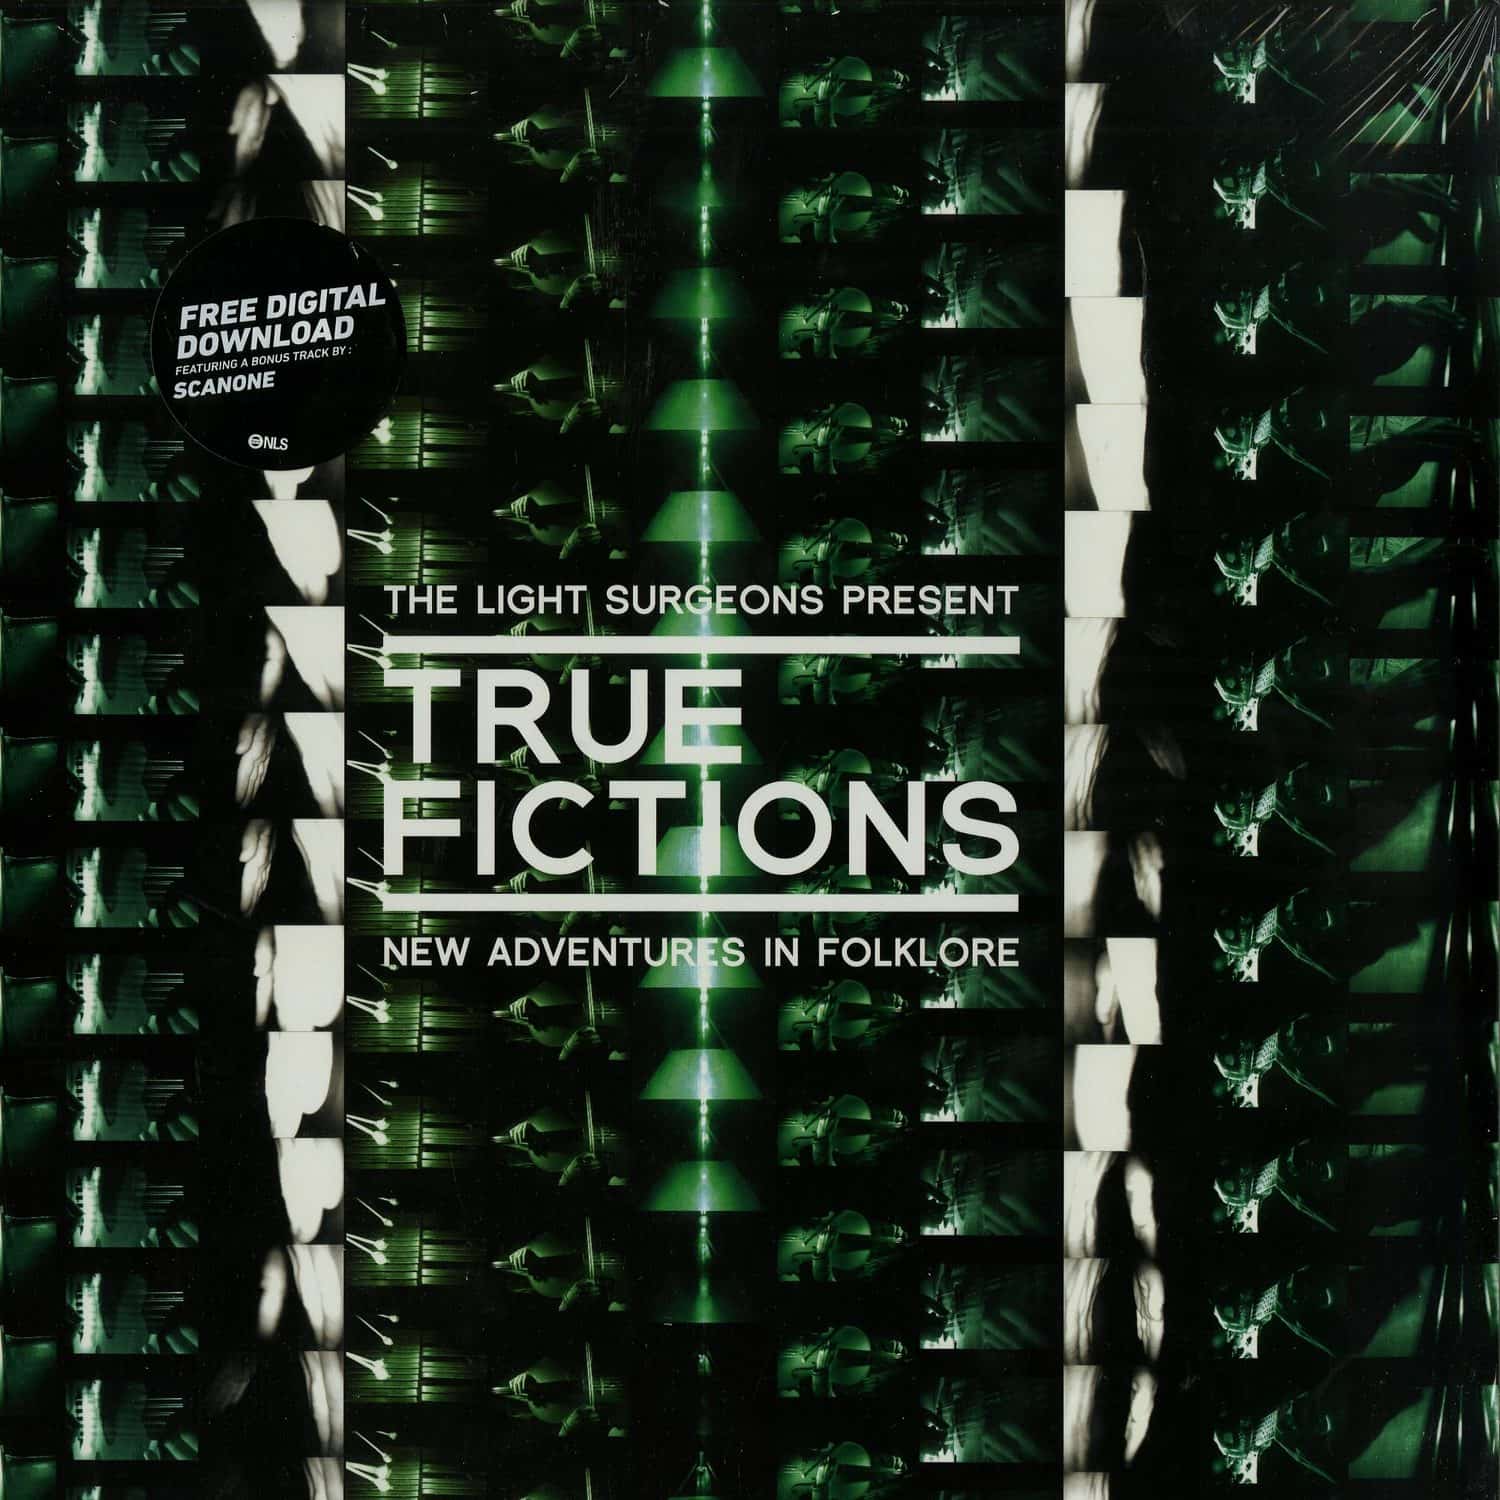 The Light Surgeons pres. - TRUE FICTIONS: NEW ADVENTURES IN FOLKLORE 